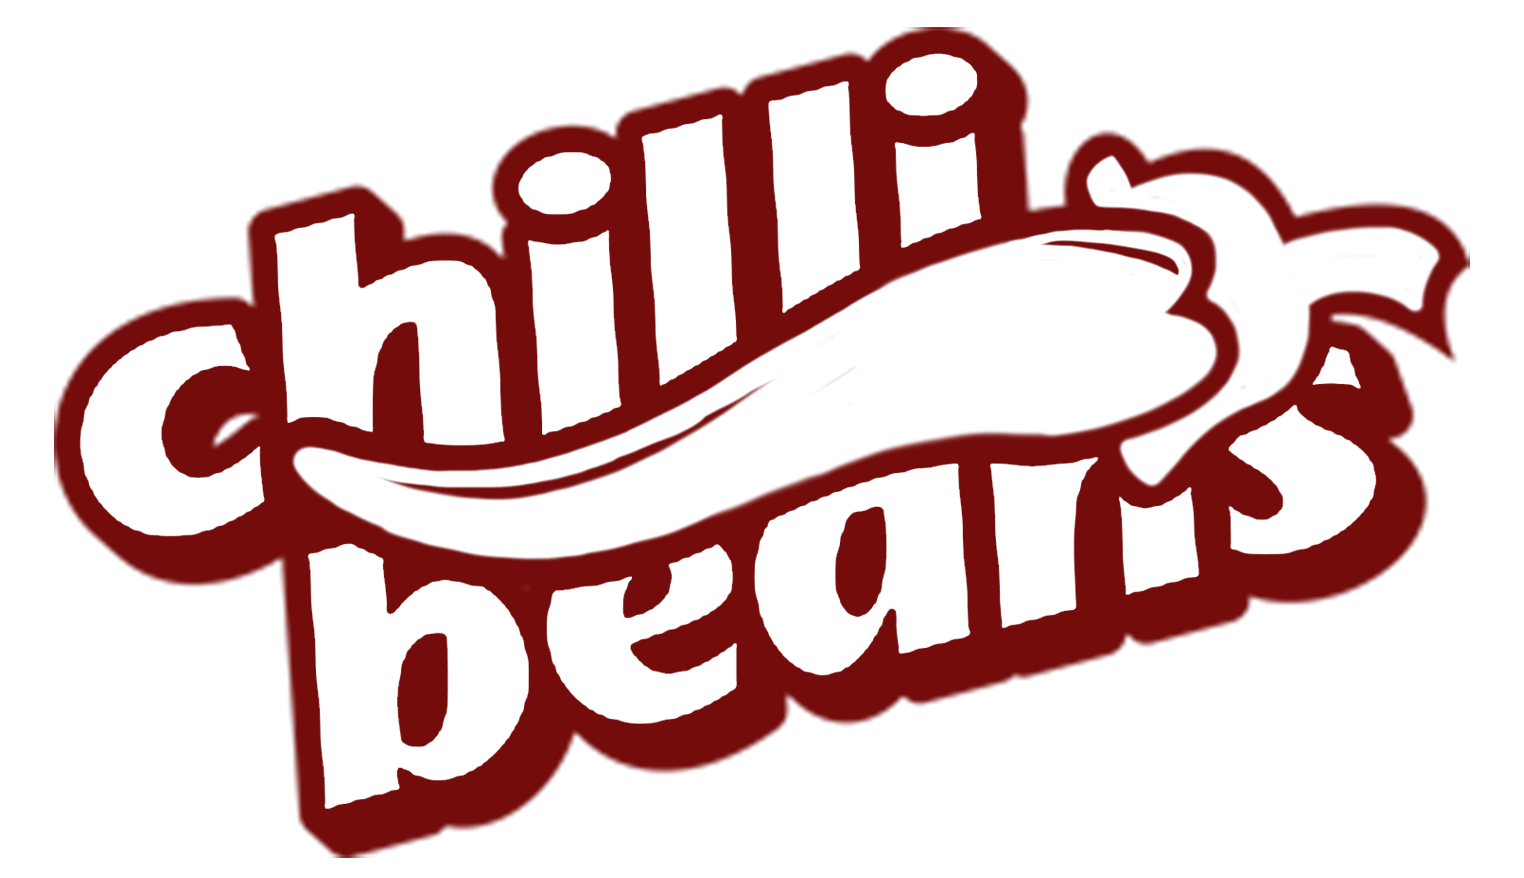 2-Chilli-Beans.png